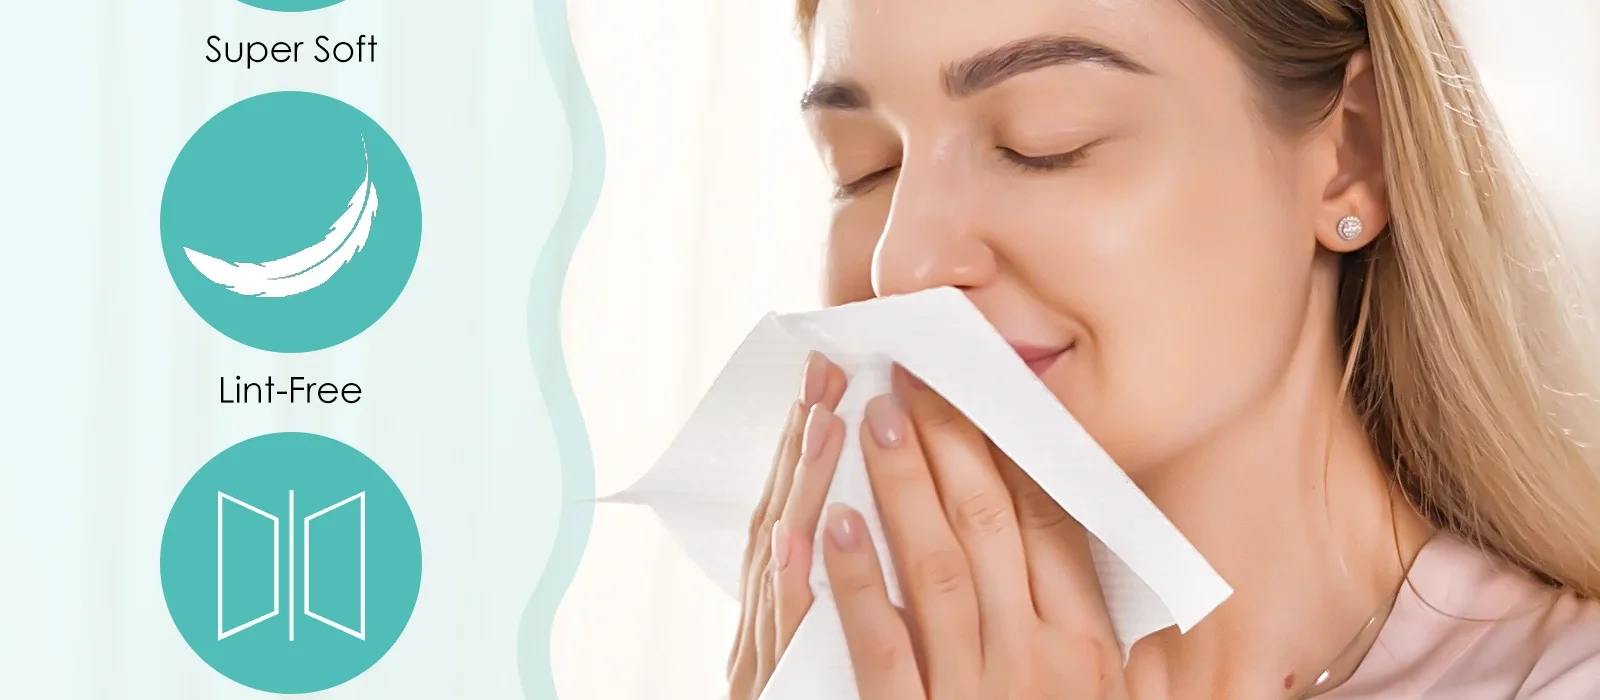 Check Out These Multifold Benefits of Disposable Face Towels